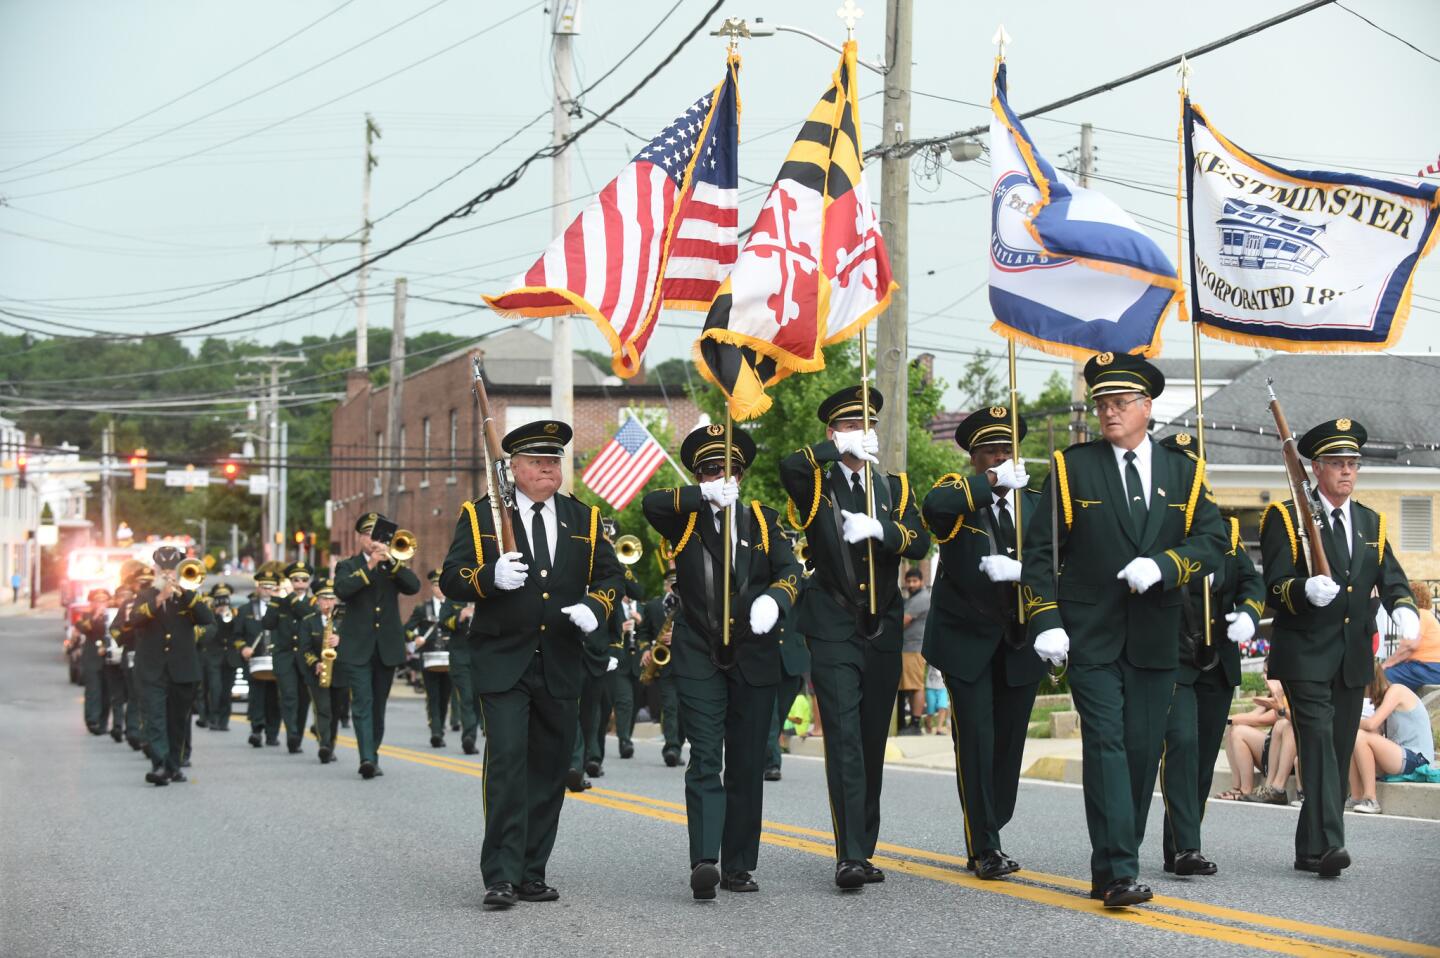 A flag squad leads the musicians in the Westminster Municpal Band as they perform in the parade leading to the Manchester Volunteer Fire Company carnvial on Tuesday, July 2.